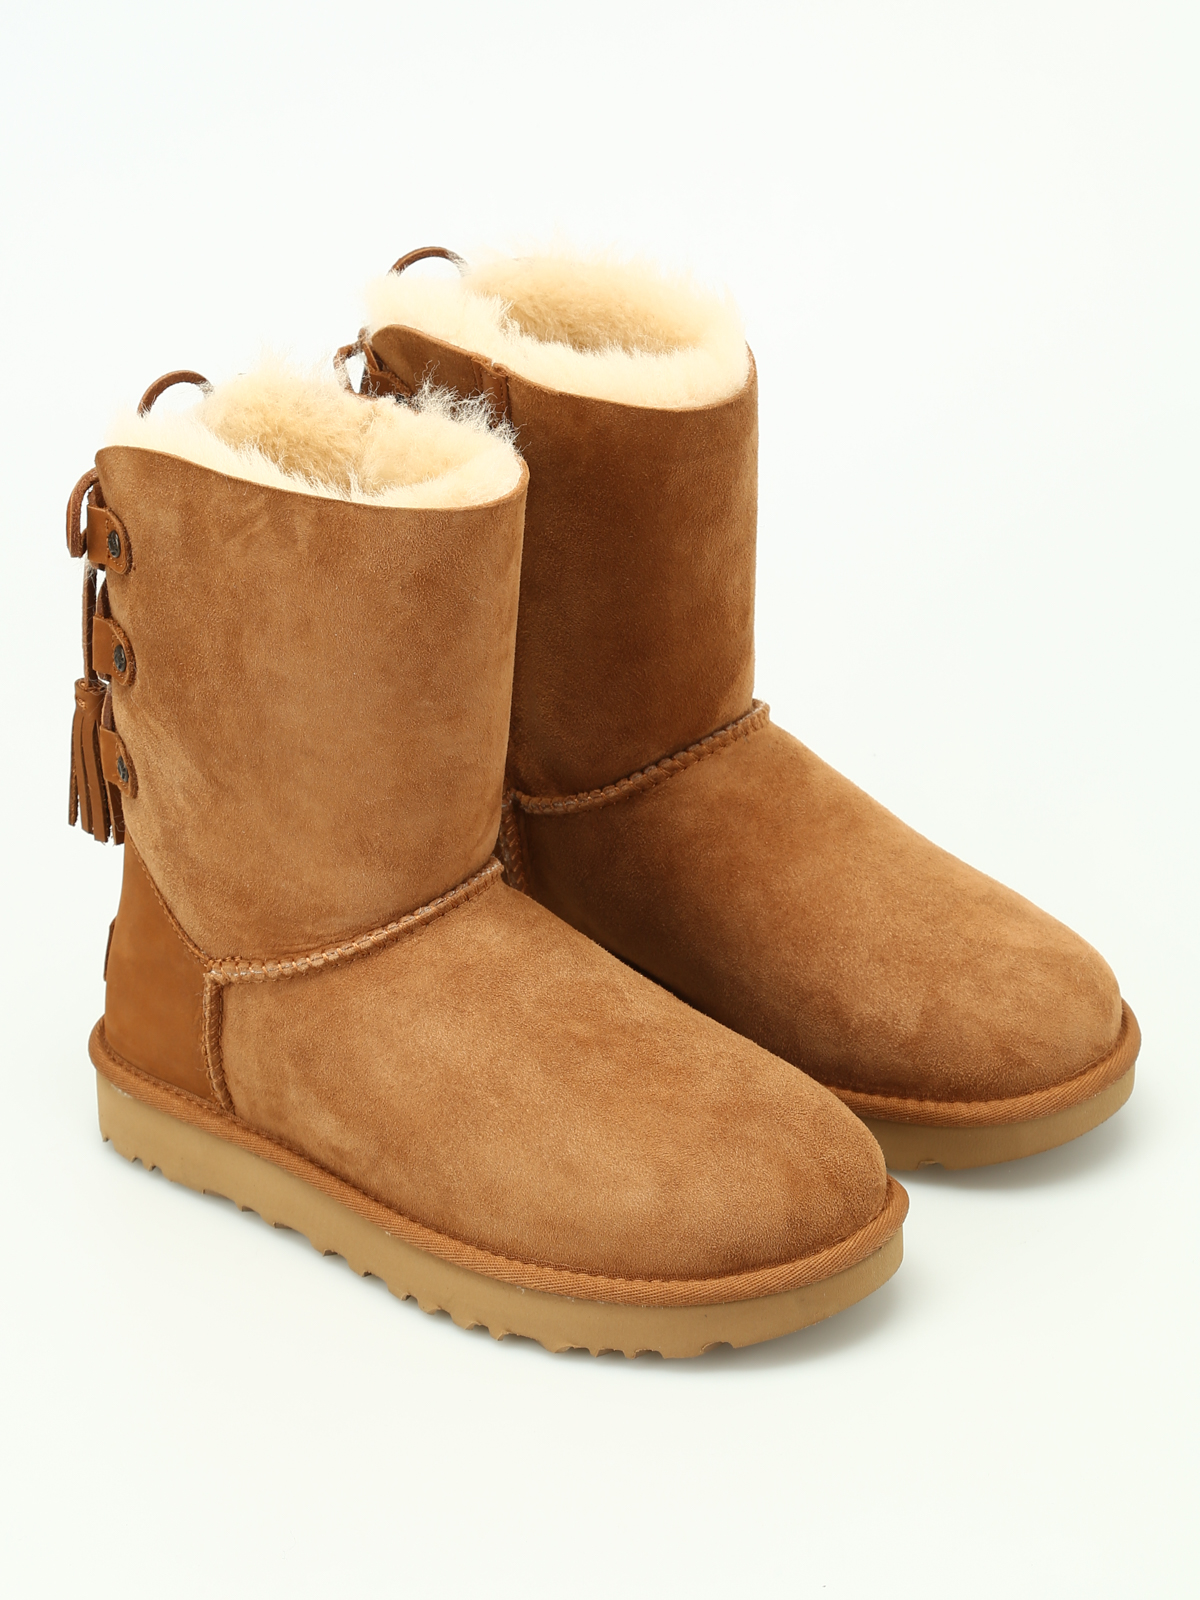 ugg boots with tassels